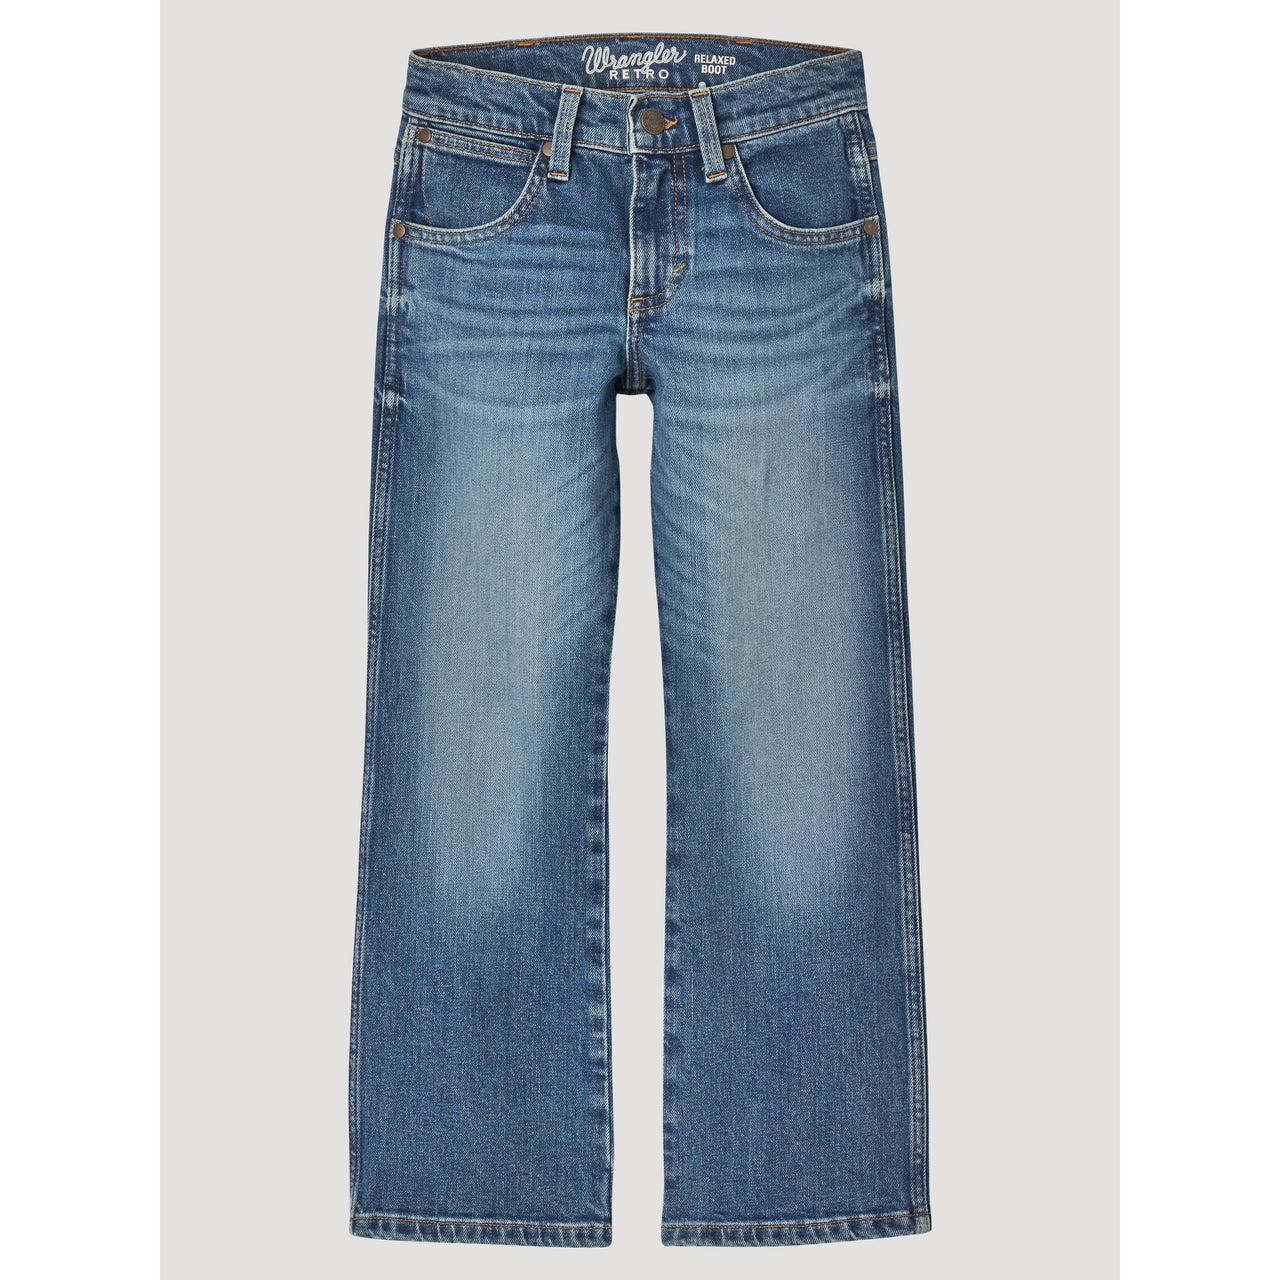 Wrangler Boy's Youth Retro Relaxed Bootcut Jeans - Andalusian